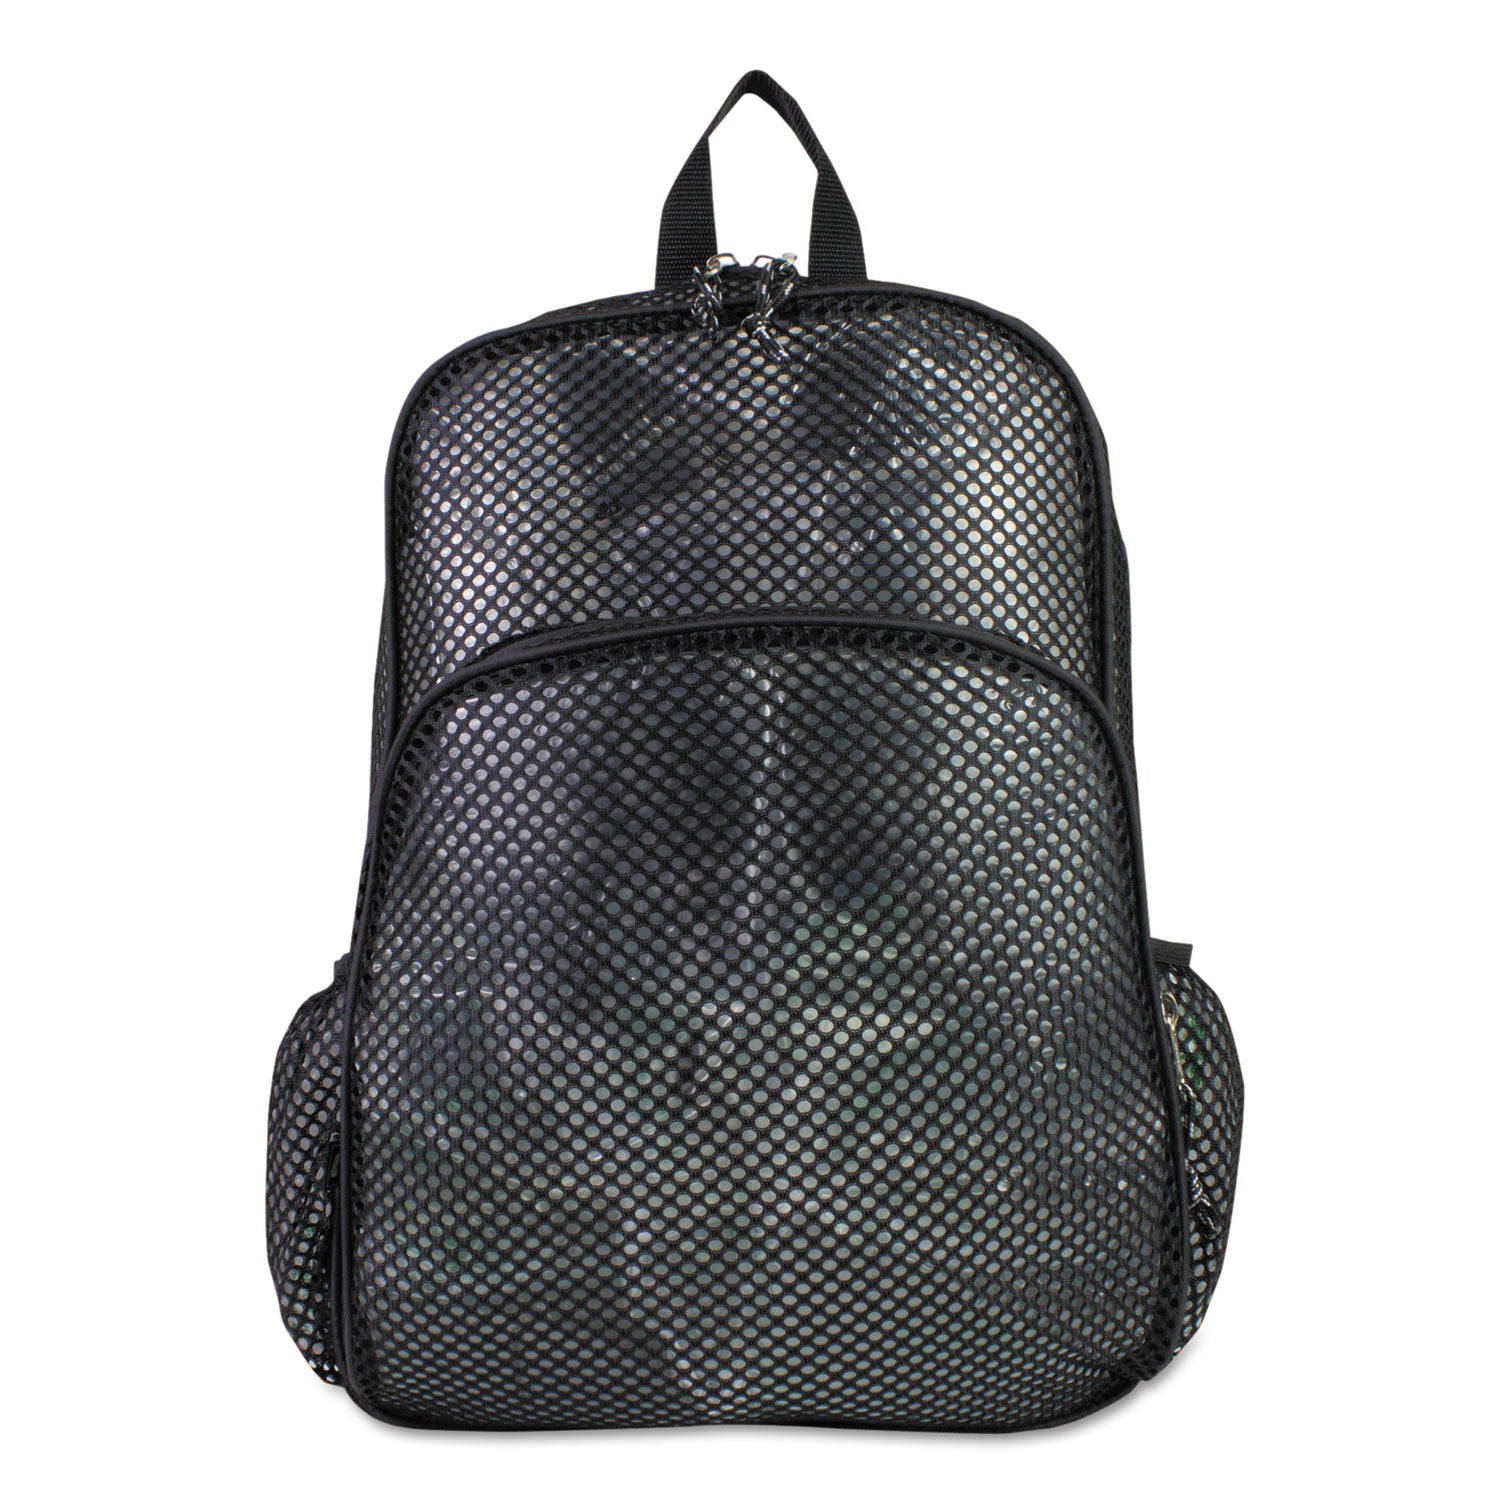 Mesh Backpack, Fits Devices Up to 17", Polyester, 12 x 17.5 x 5.5, Black - 